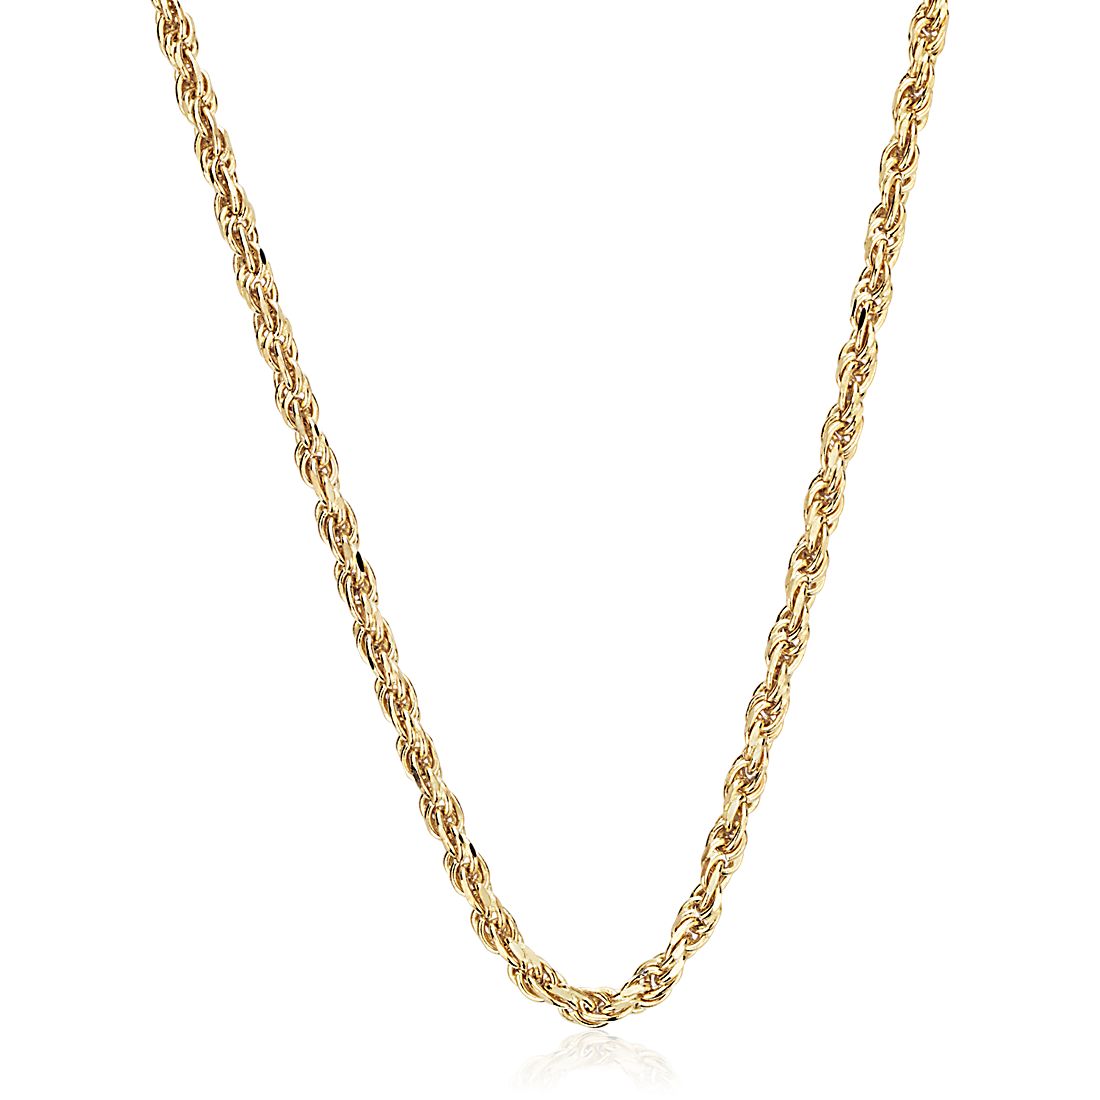 Rope Chain in 14k Yellow Gold (1.15 mm)